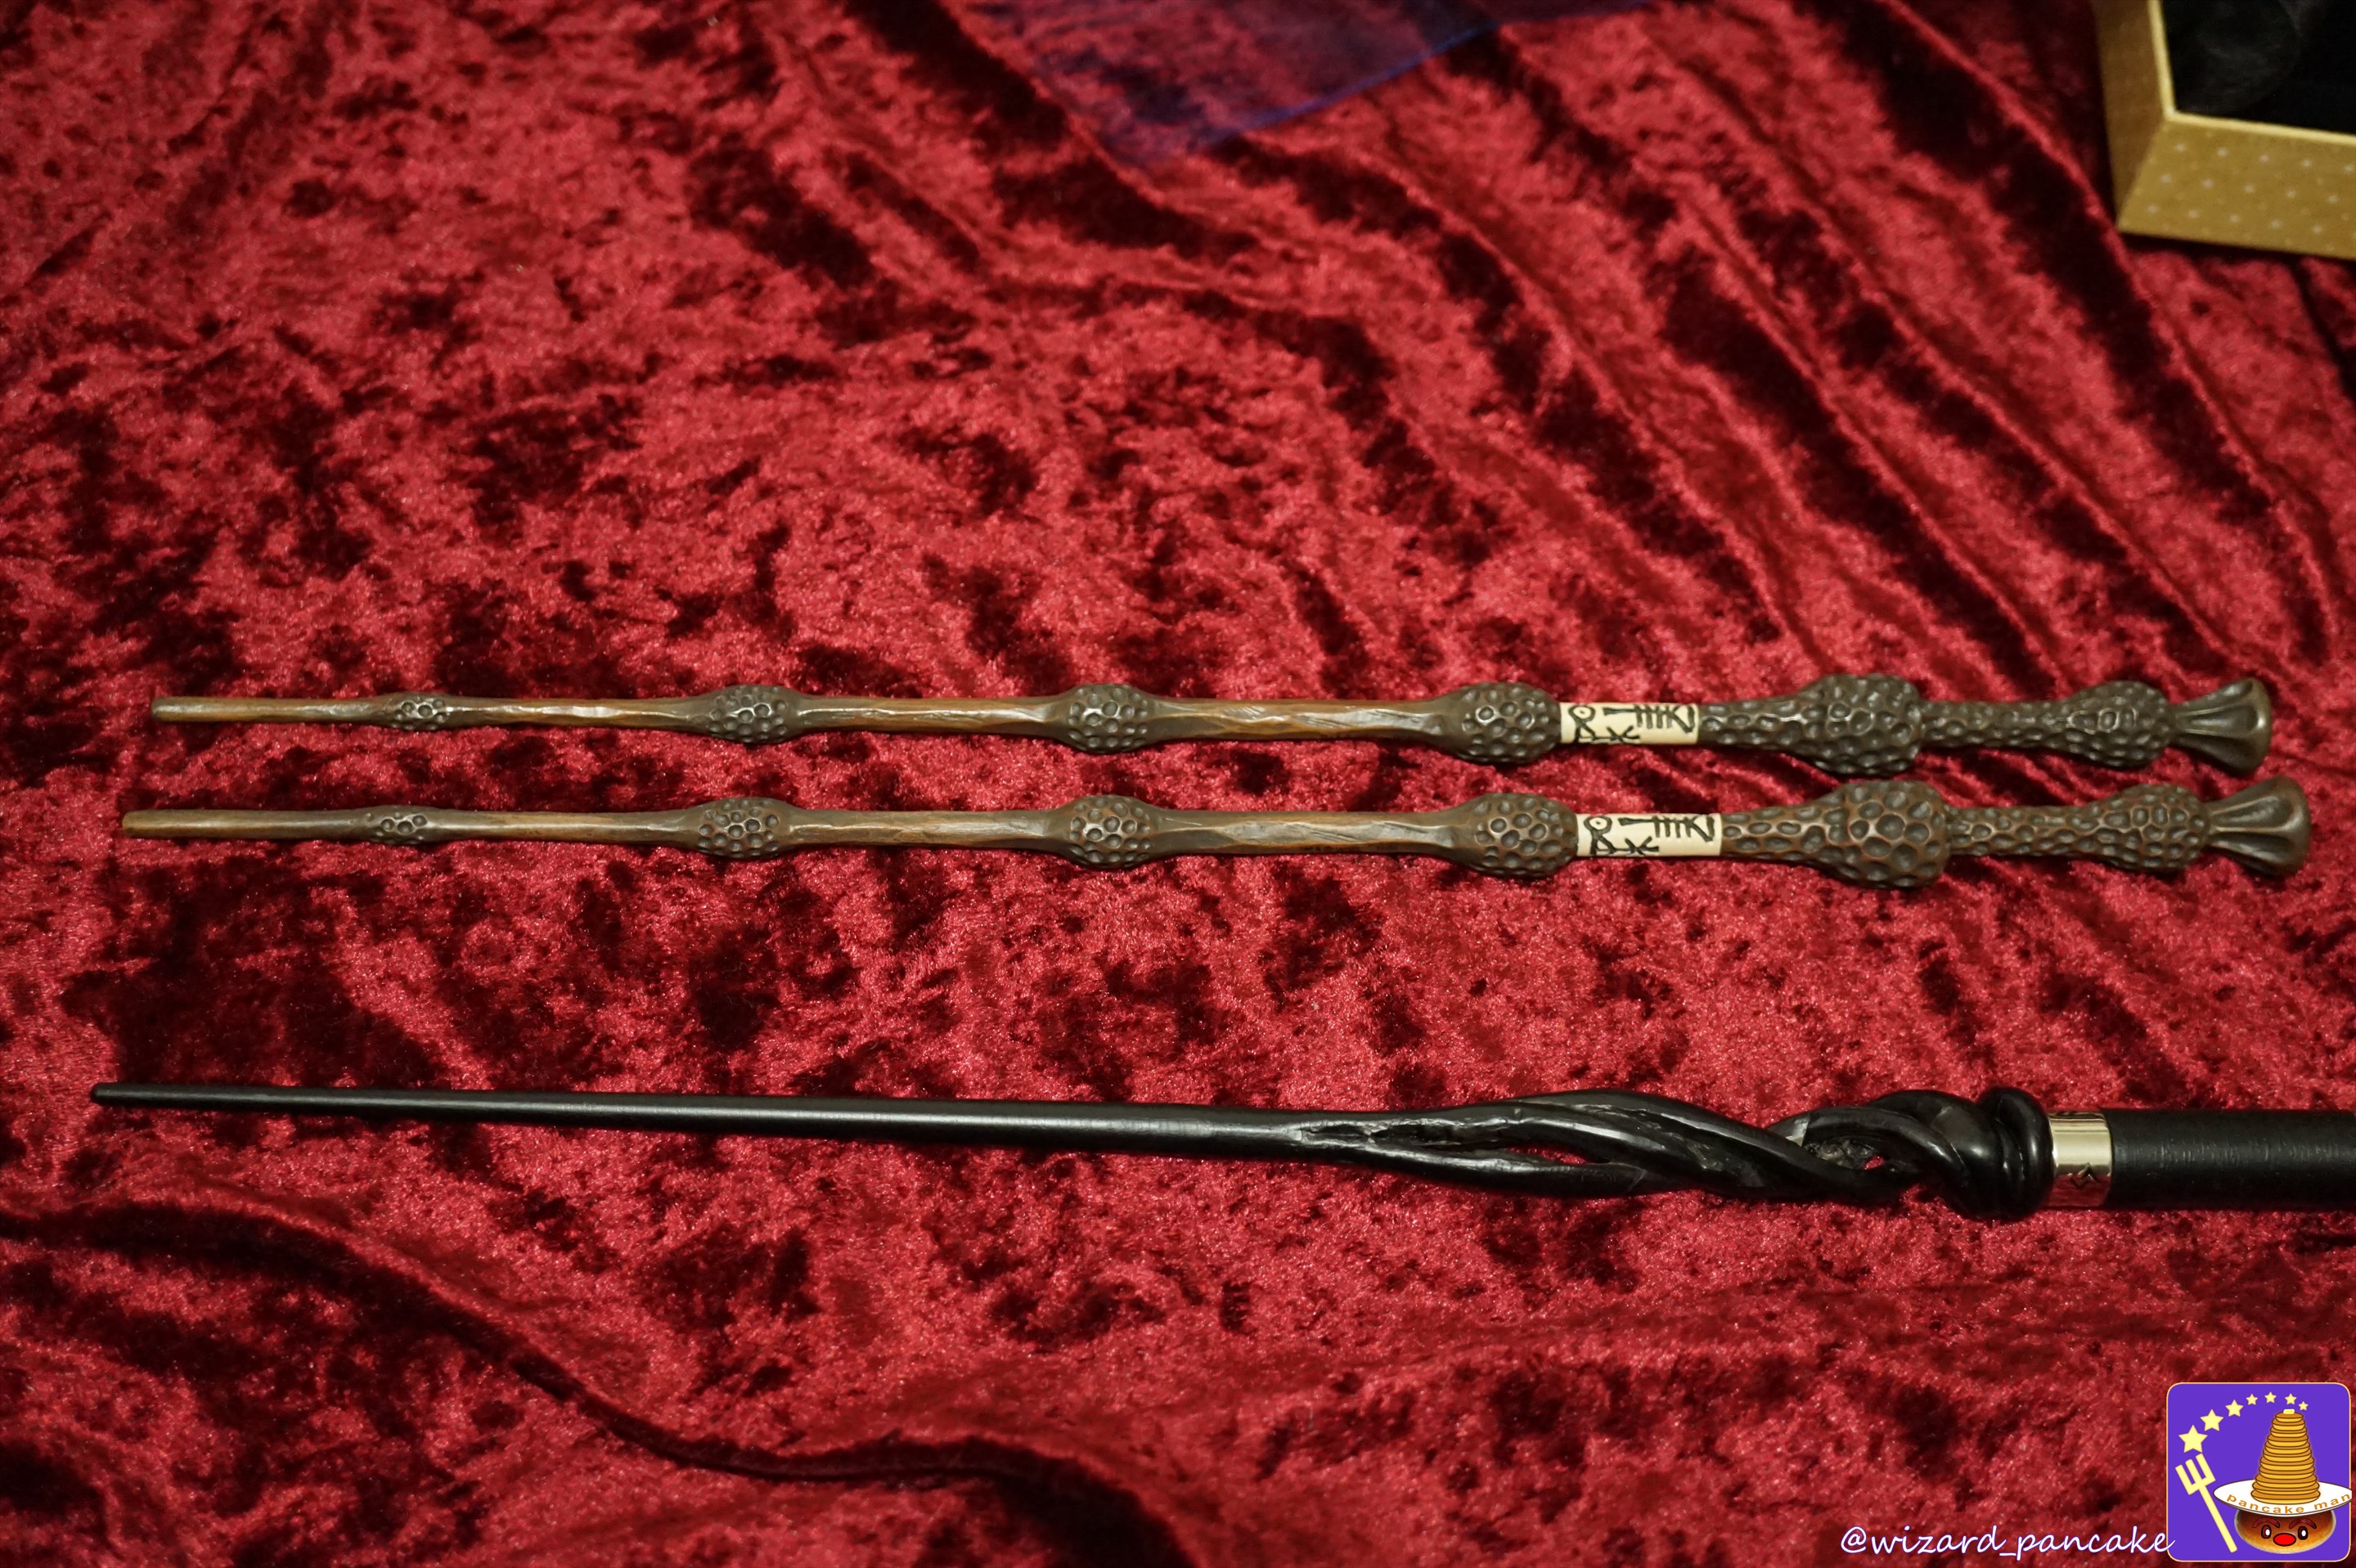 Noble Collection (noblecollection) Young Dumbledore's replica wand from Fantaboby's Young Dumbledore, Headmaster Dumbledore's replica wand from Harriotta, USJ Ollivander's Dumbledore's wand from USJ Ollivander.